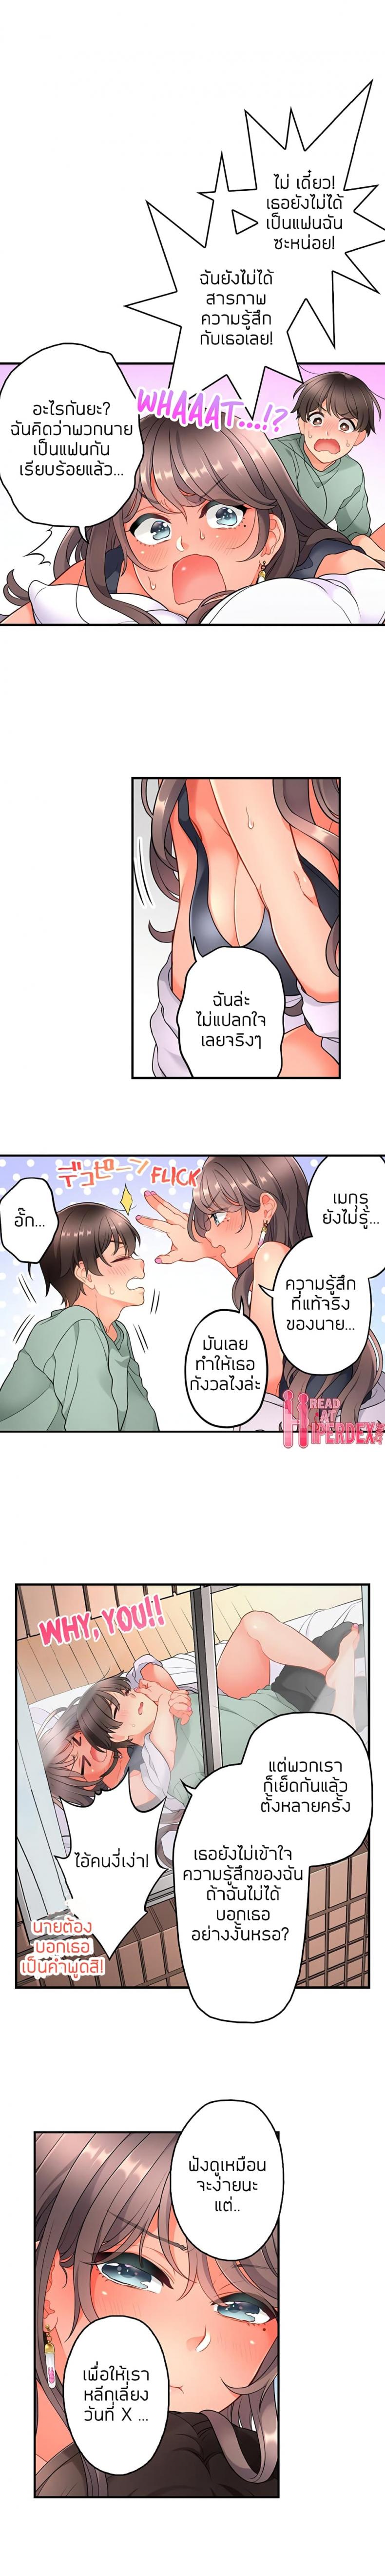 My Friend Came Back From the Future to Fuck Me 22 ภาพที่ 4